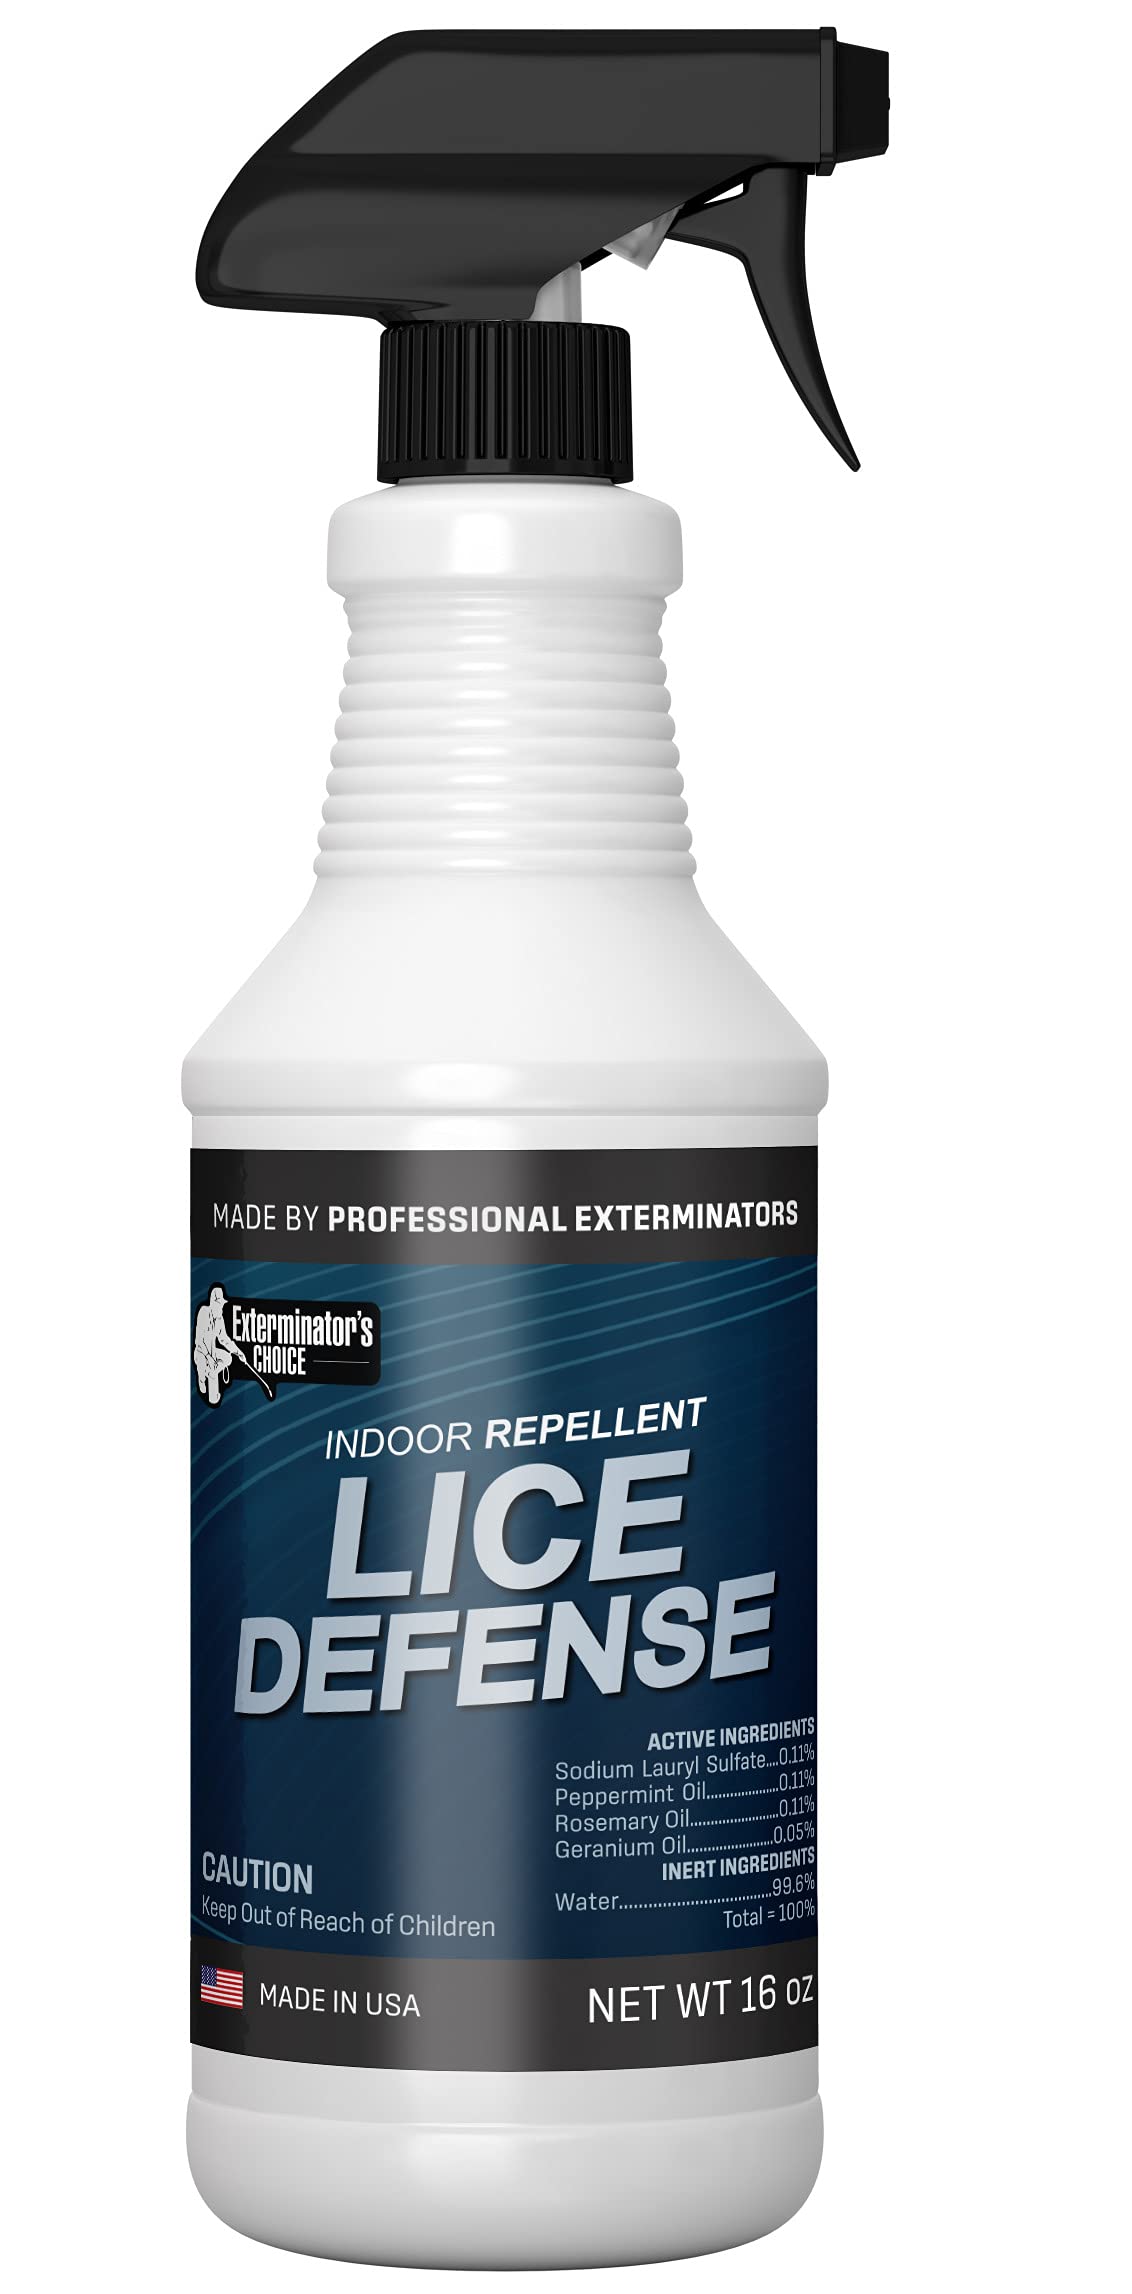 Lice Treatment and Defense - RID